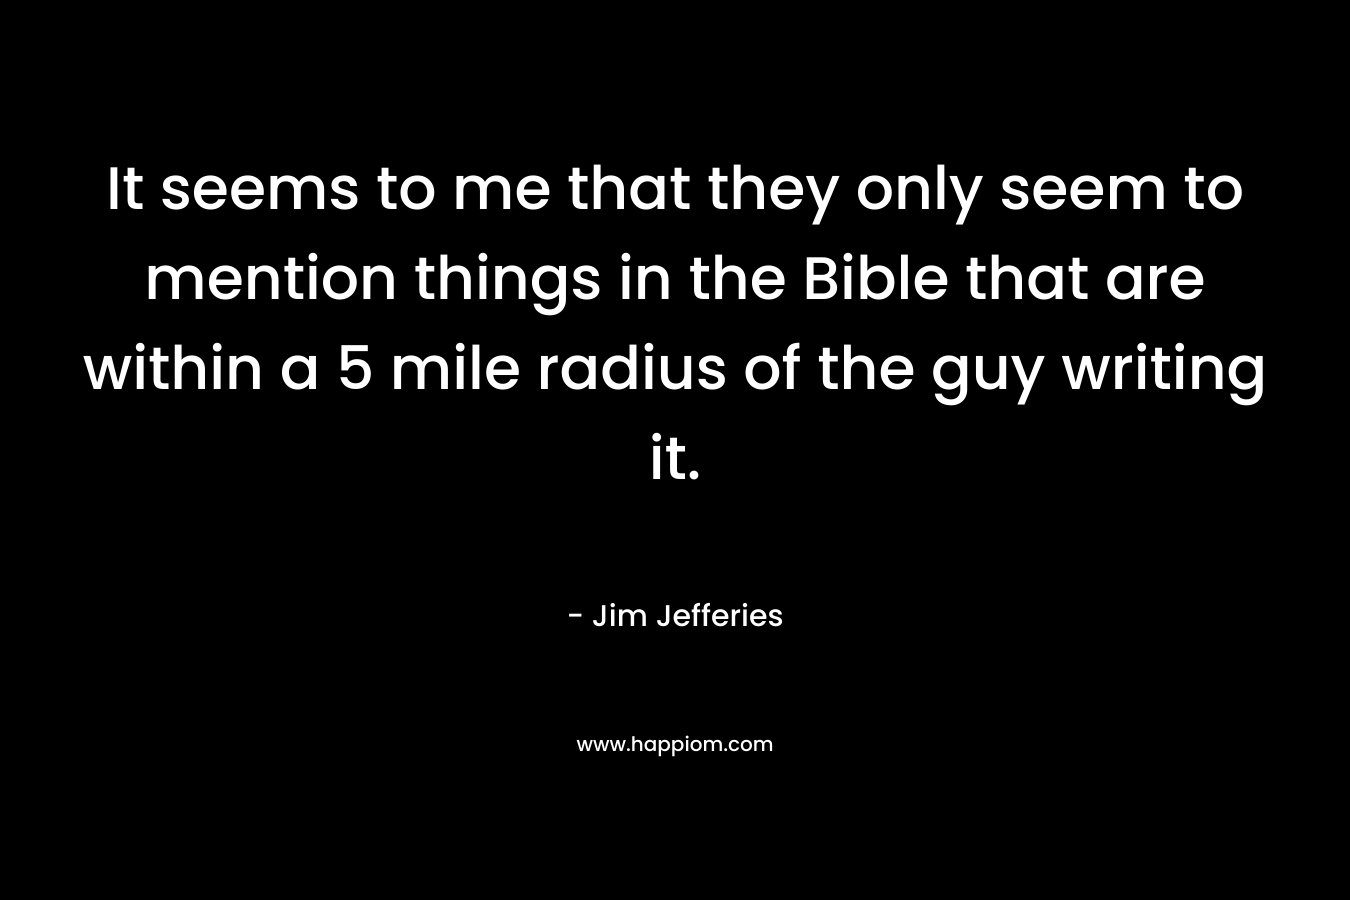 It seems to me that they only seem to mention things in the Bible that are within a 5 mile radius of the guy writing it. – Jim  Jefferies